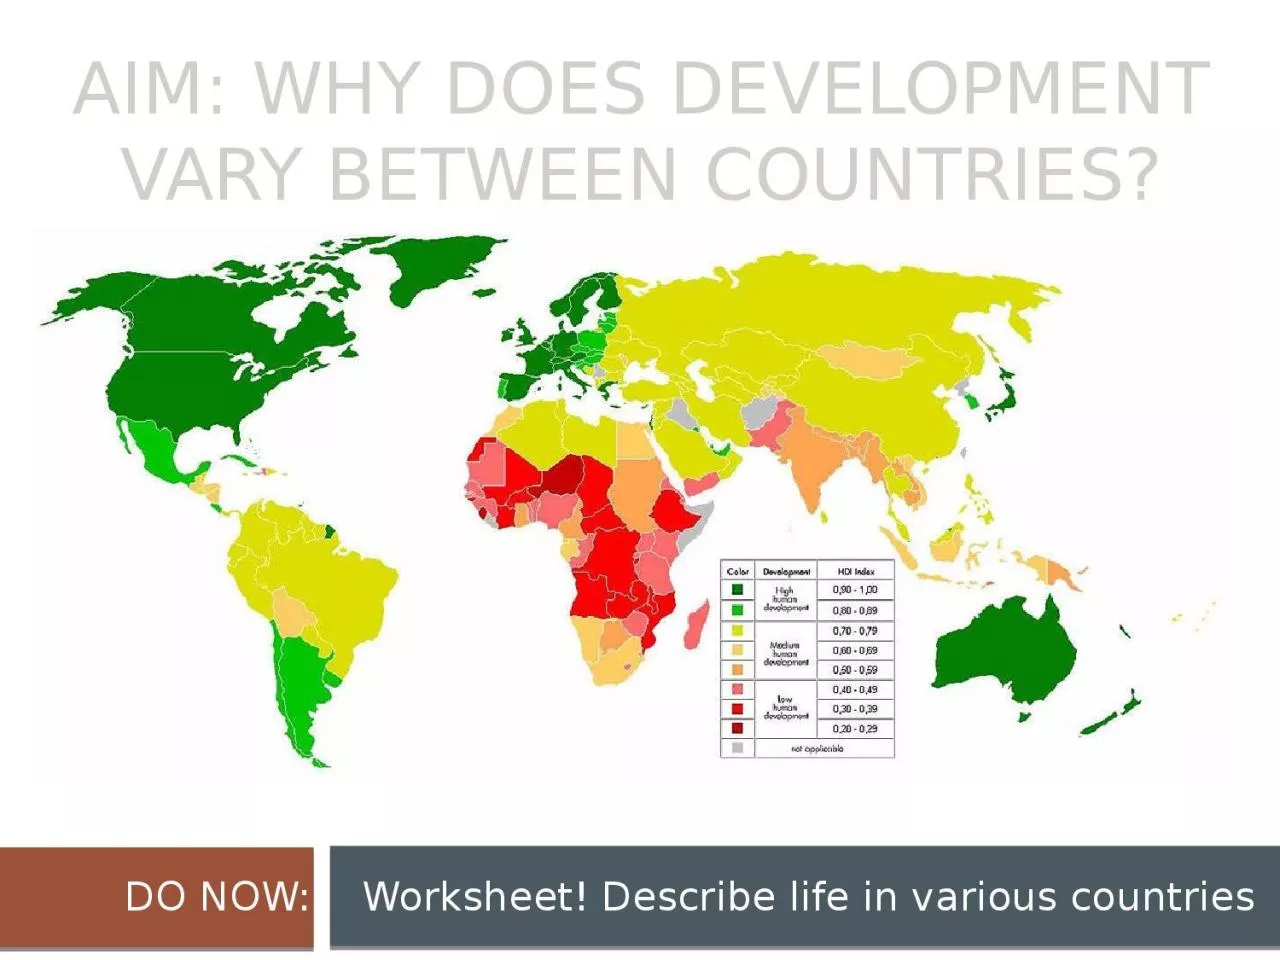 AIM: WHY DOES DEVELOPMENT VARY BETWEEN COUNTRIES?